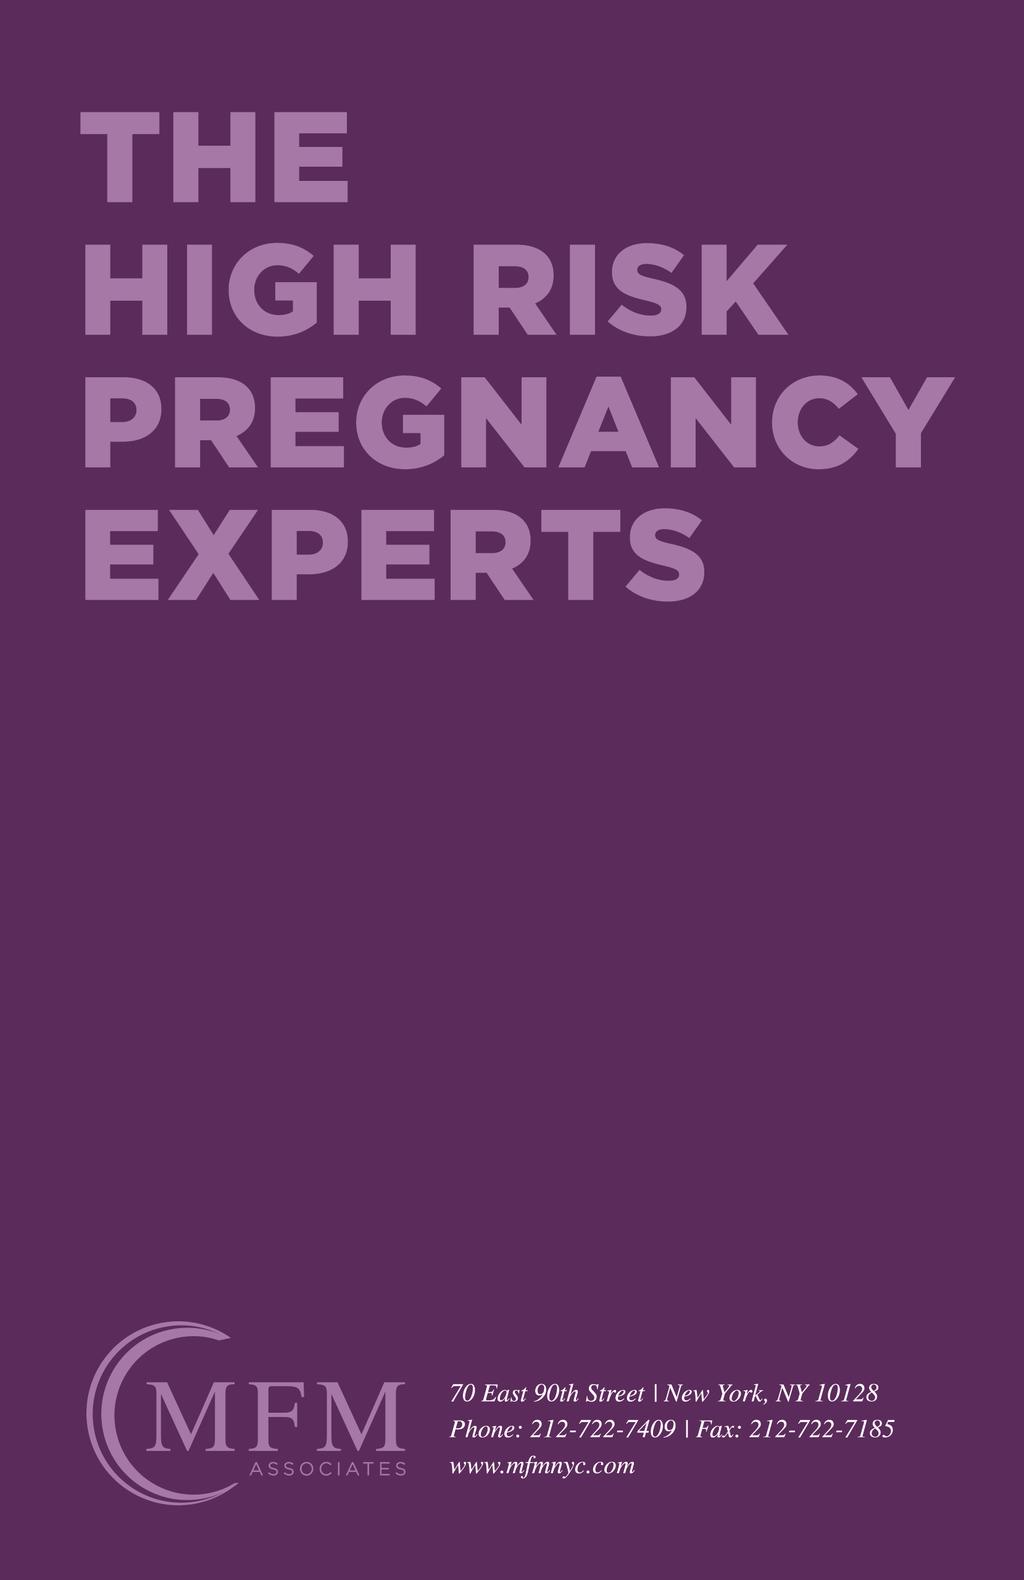 THE HIGH RISK PREGNANCY EXPERTS 70 East 90th Street New York,